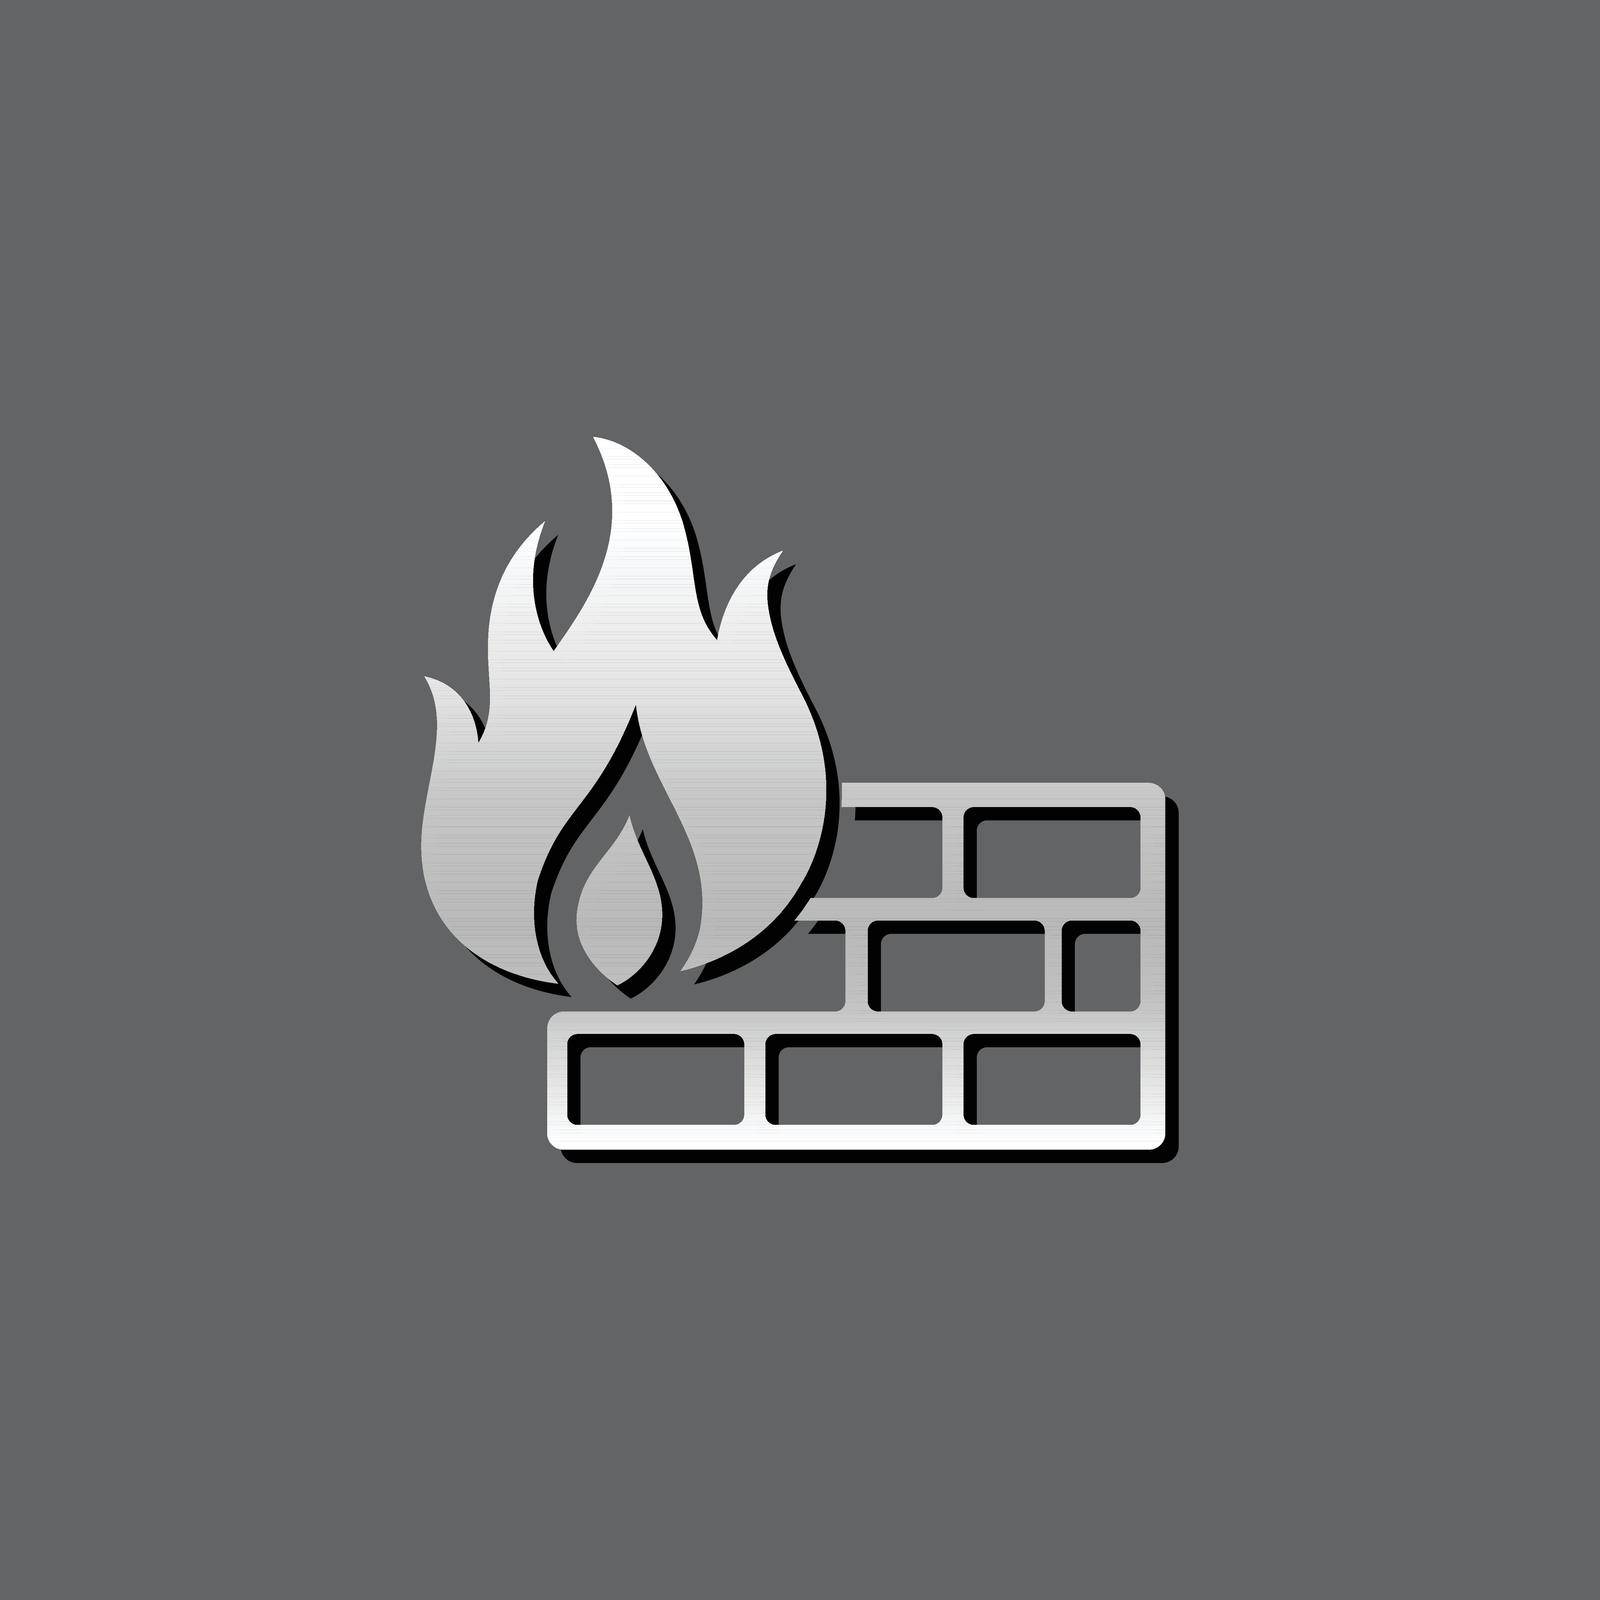 Firewall icon in metallic grey color style. Computer network internet protection